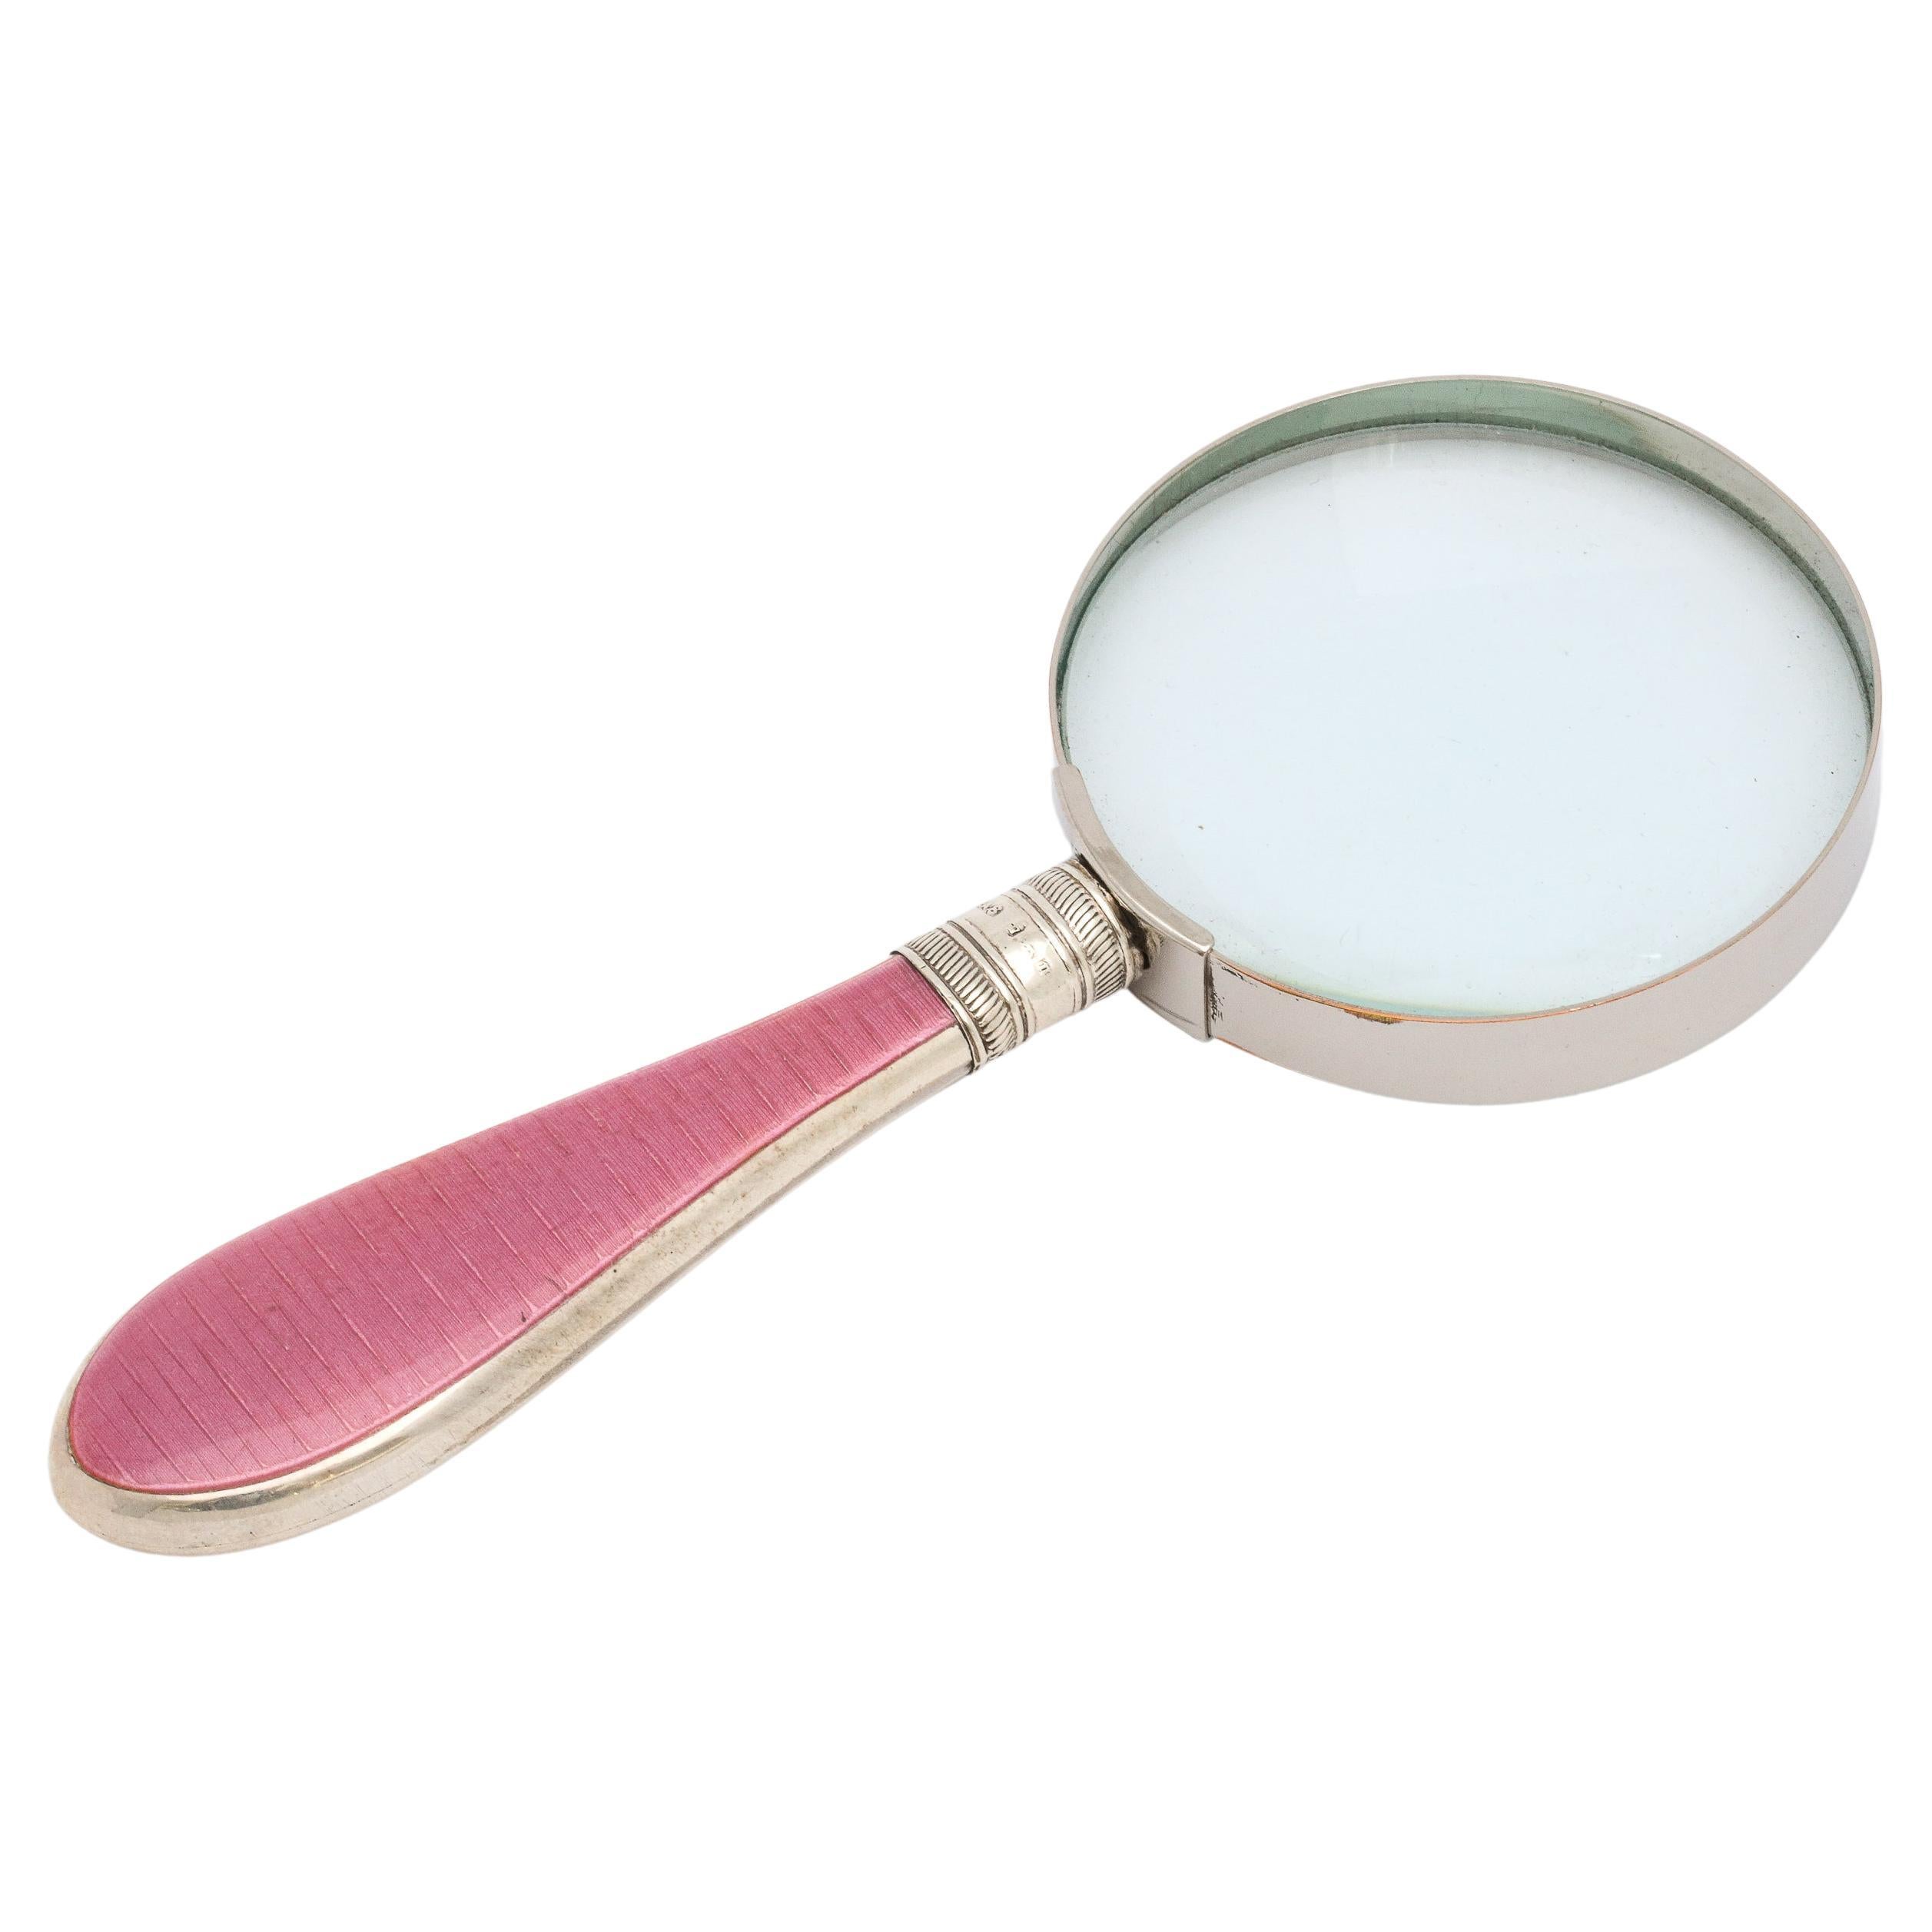 What was the first documented use of magnifying glasses?